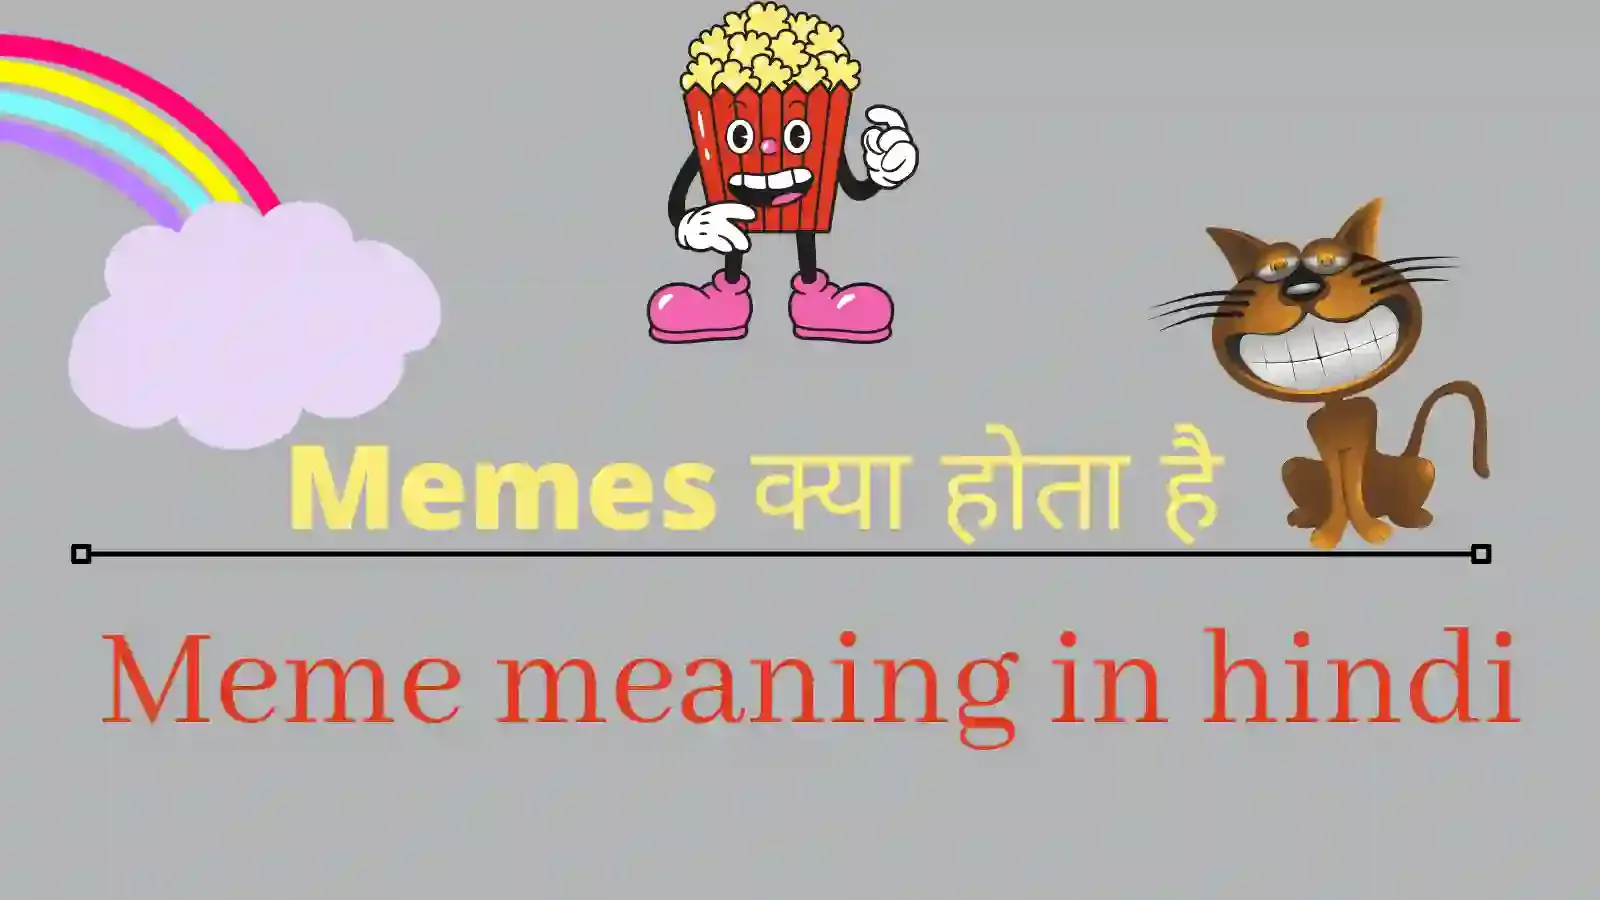 Meaning of meme in hindi , memes meaning in hindi , meme hindi meaning